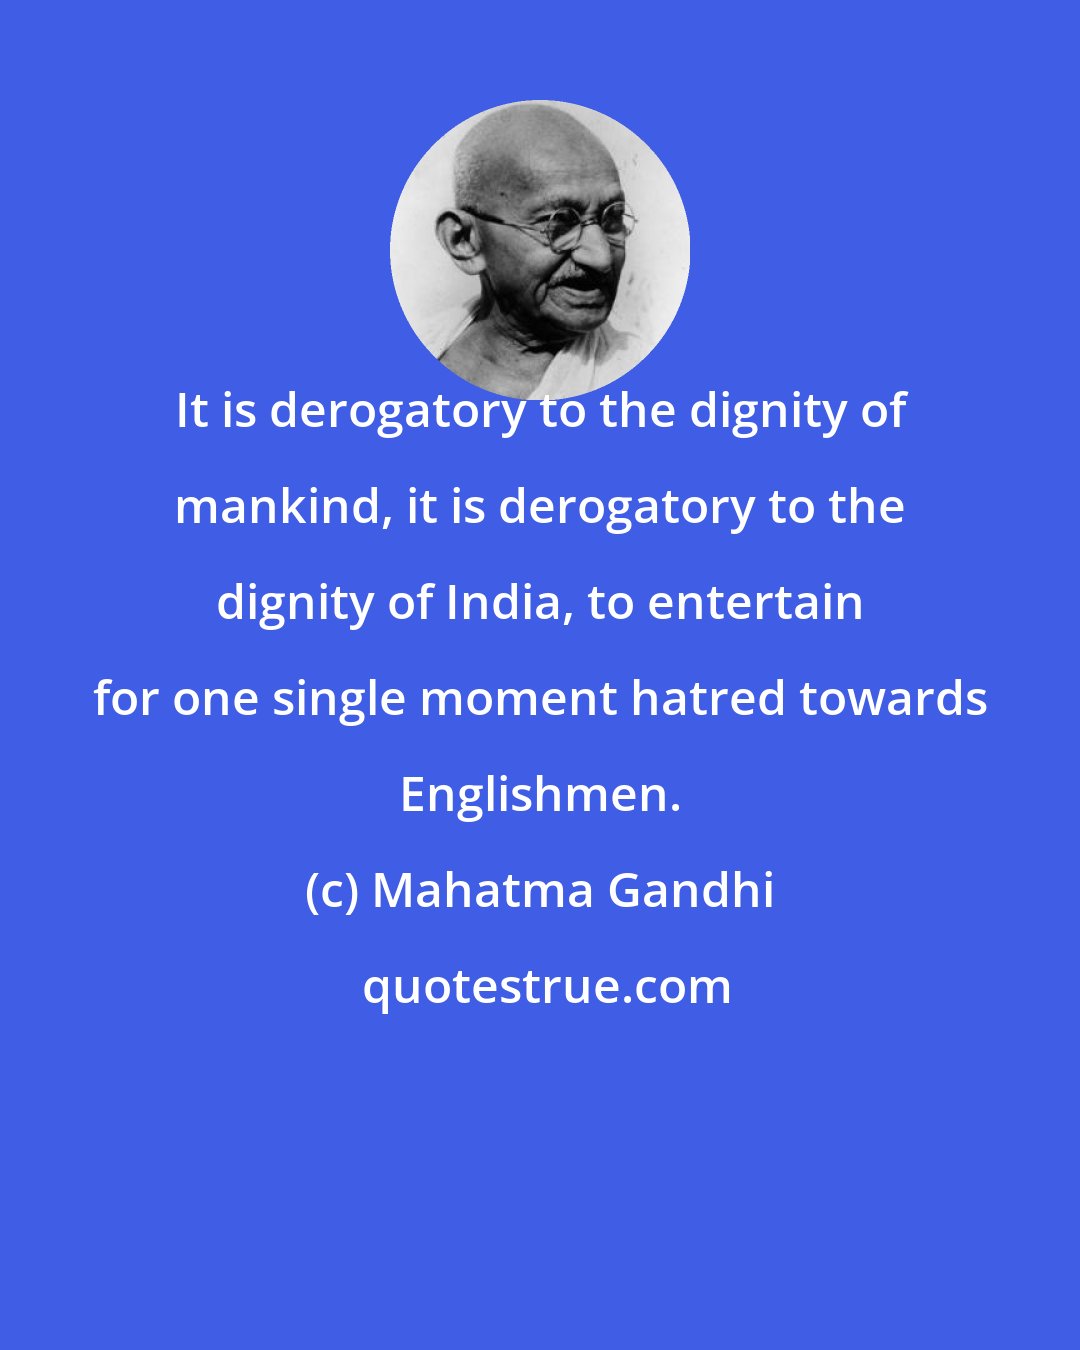 Mahatma Gandhi: It is derogatory to the dignity of mankind, it is derogatory to the dignity of India, to entertain for one single moment hatred towards Englishmen.